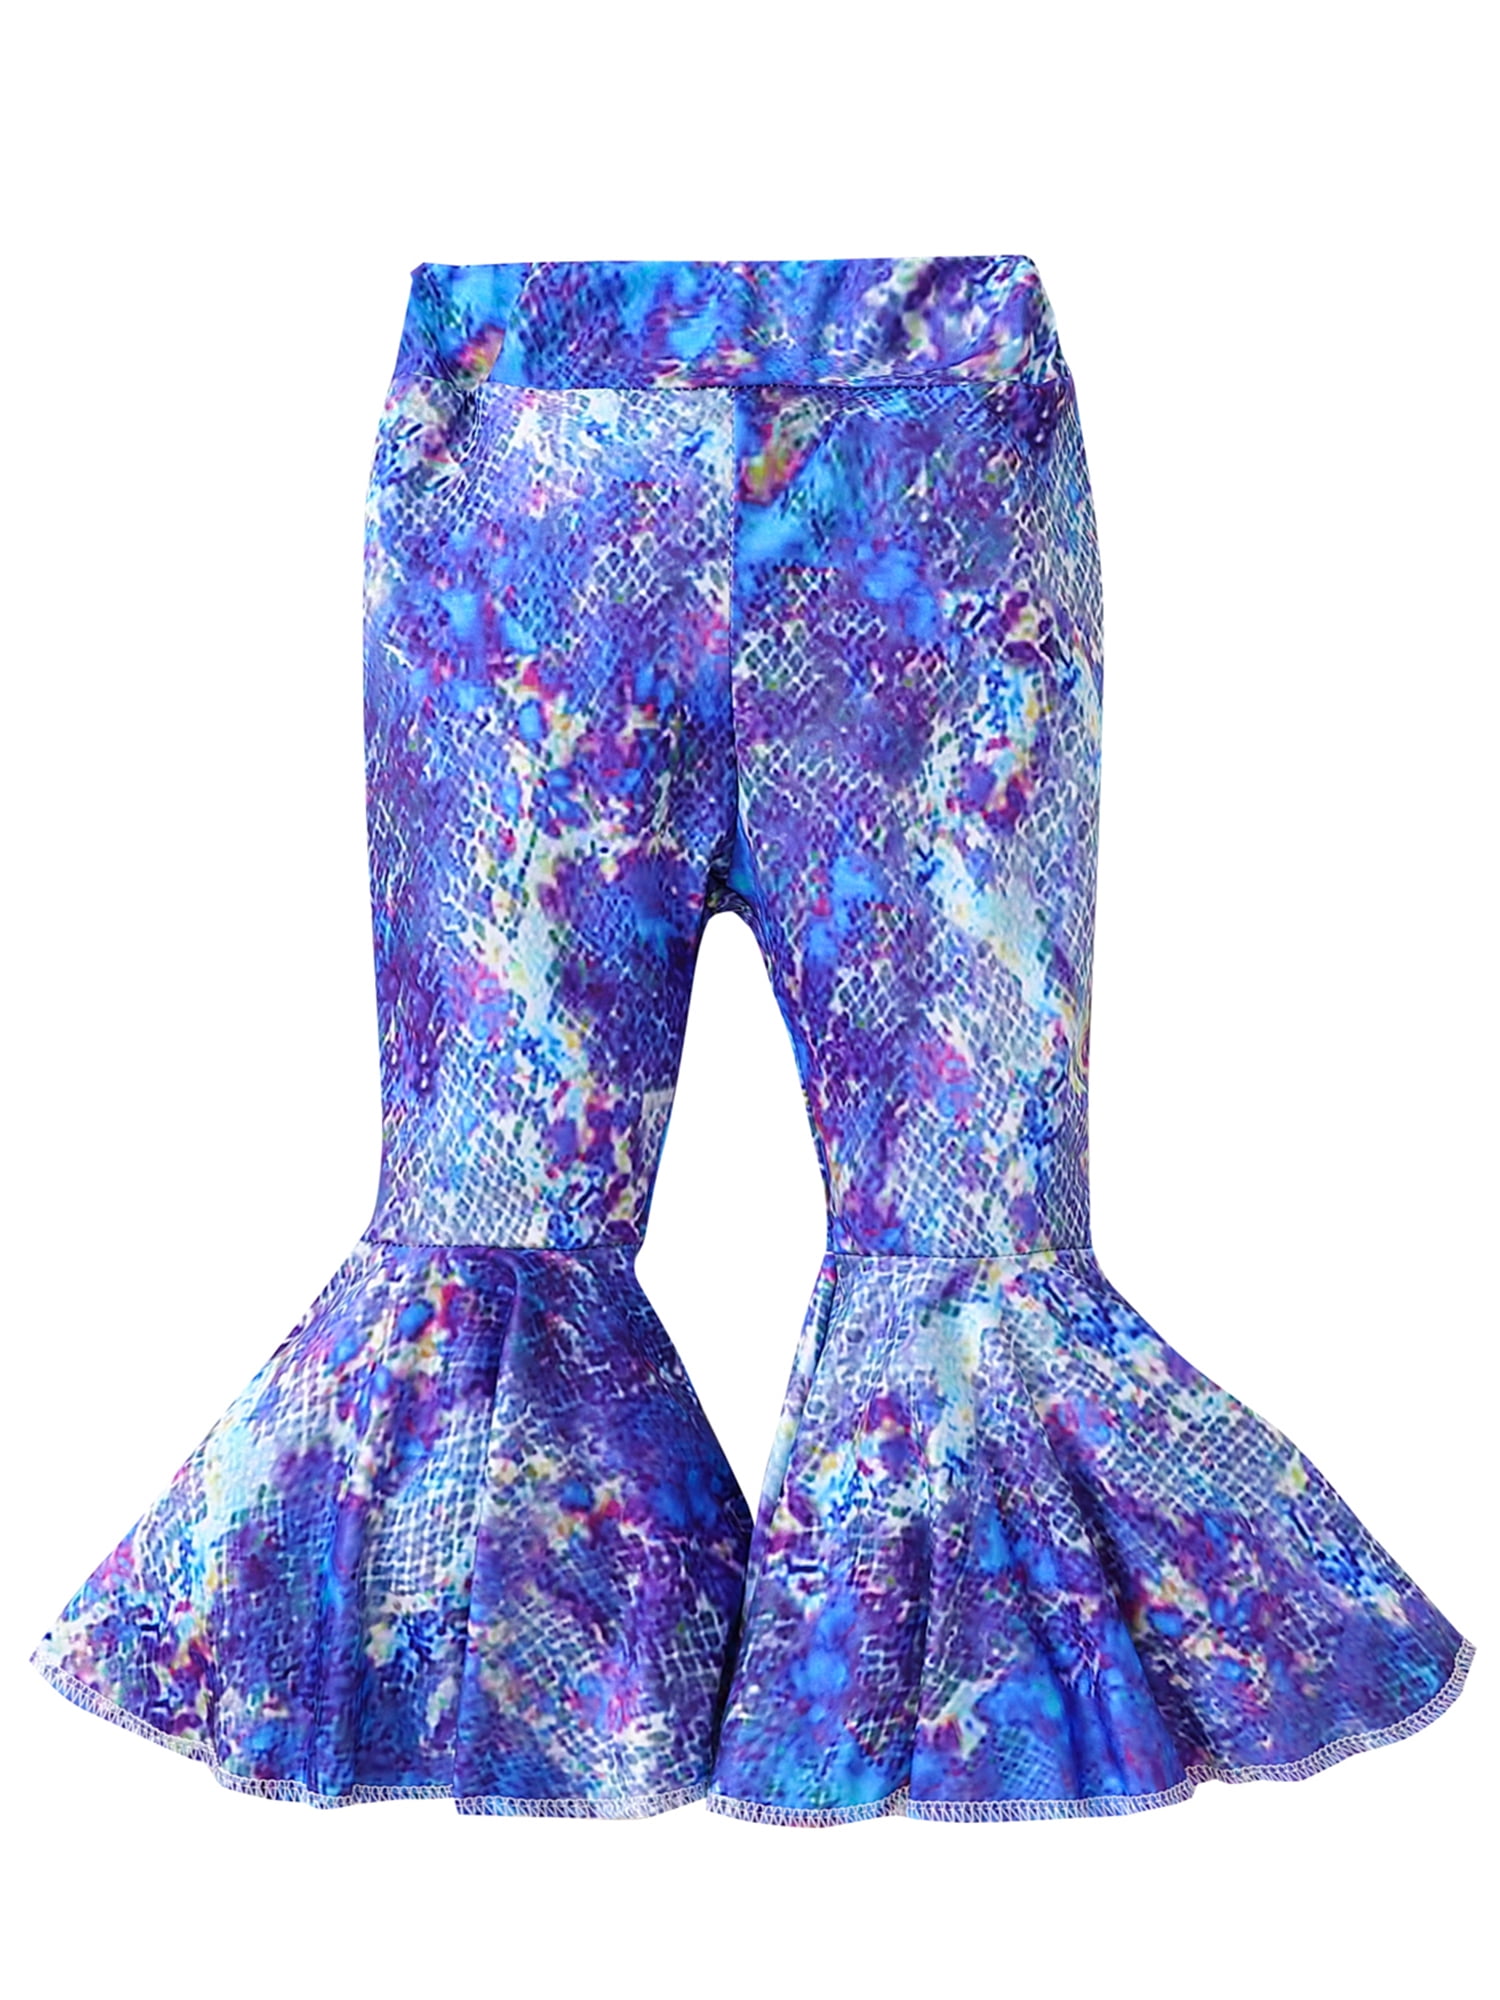 Baby Girl Flare Pants Kids Bell Bottoms Fish Scale Print Toddler Leggings  Ruffle Long Pant Outfits Clothes 